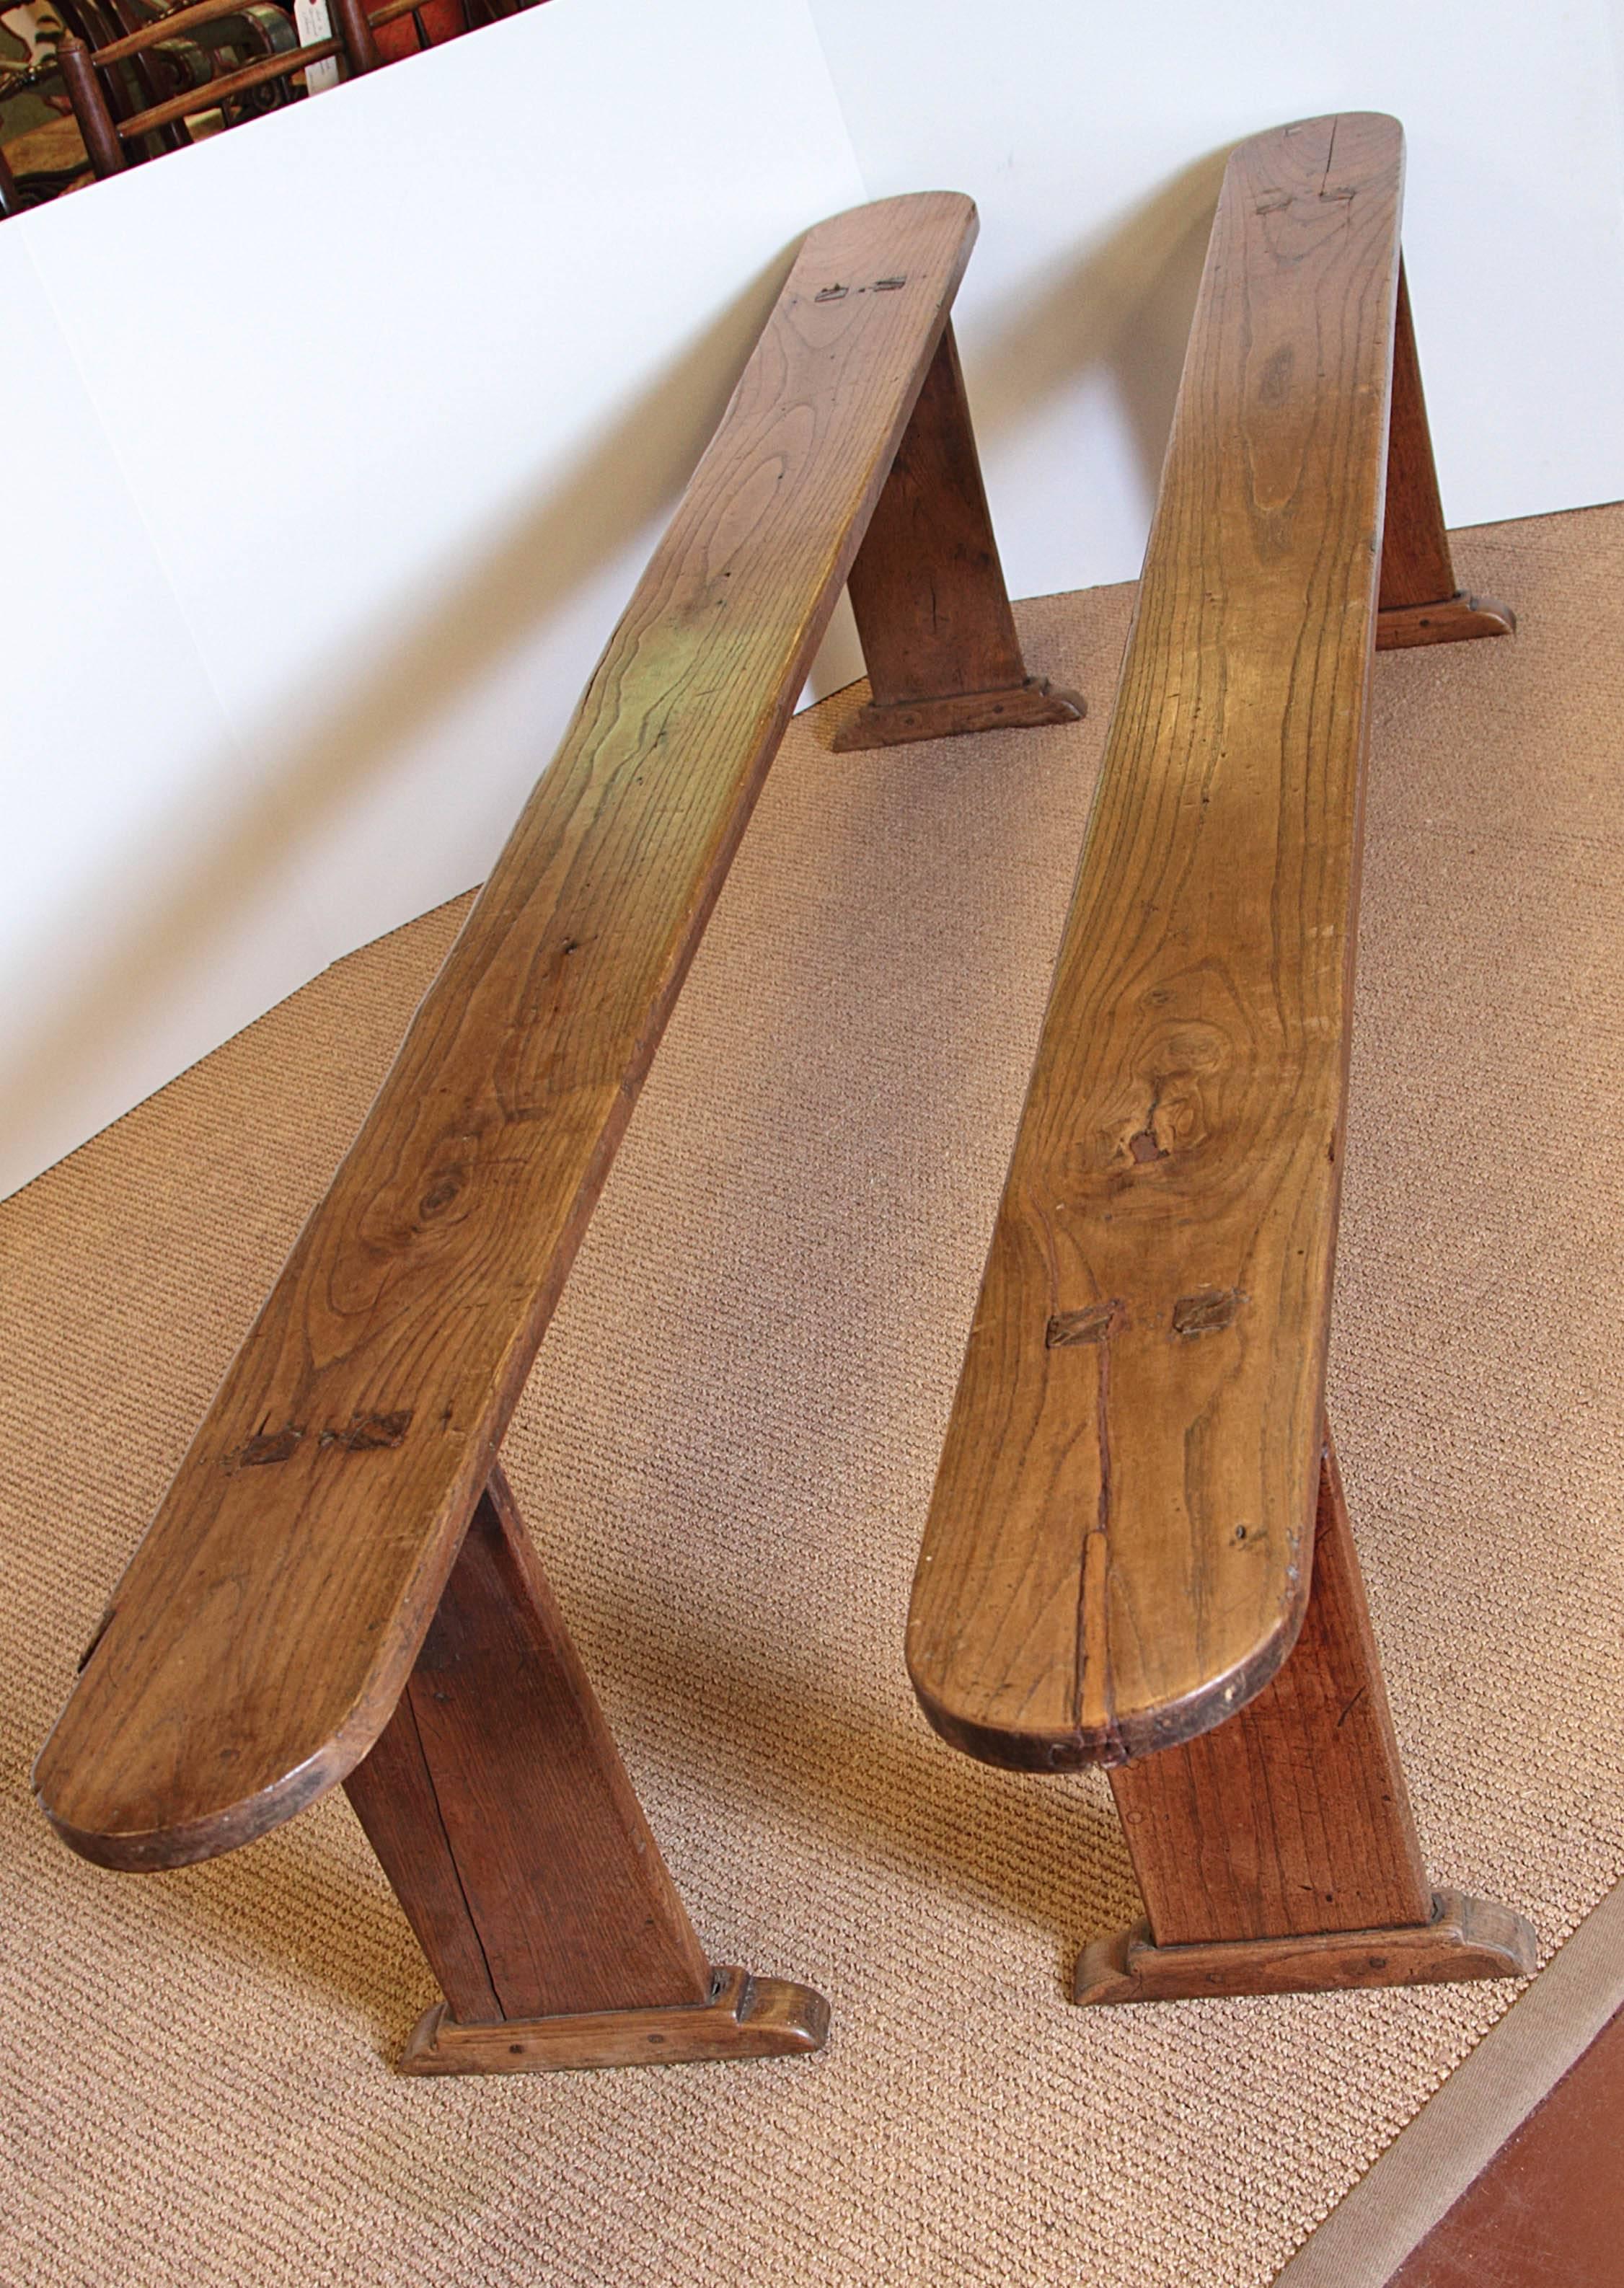 Pair of long oak meeting benches hand pegged construction.